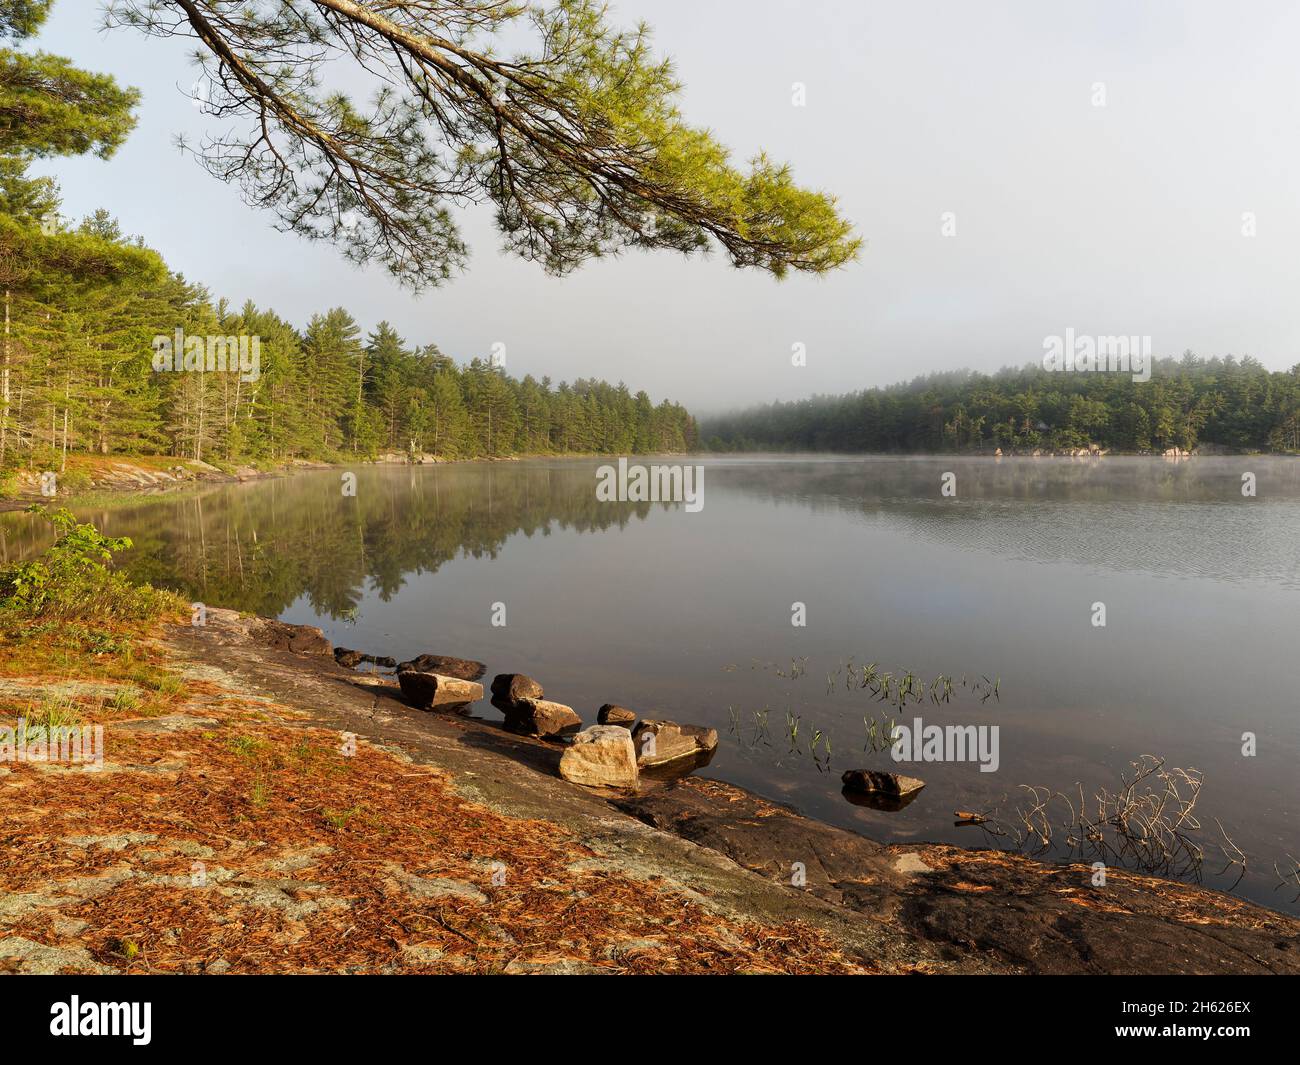 camping in canada,ontario,kawartha highlands provincial park,nature,wilderness,lake,forest,morning mist,natural,scenery,tranquility Stock Photo